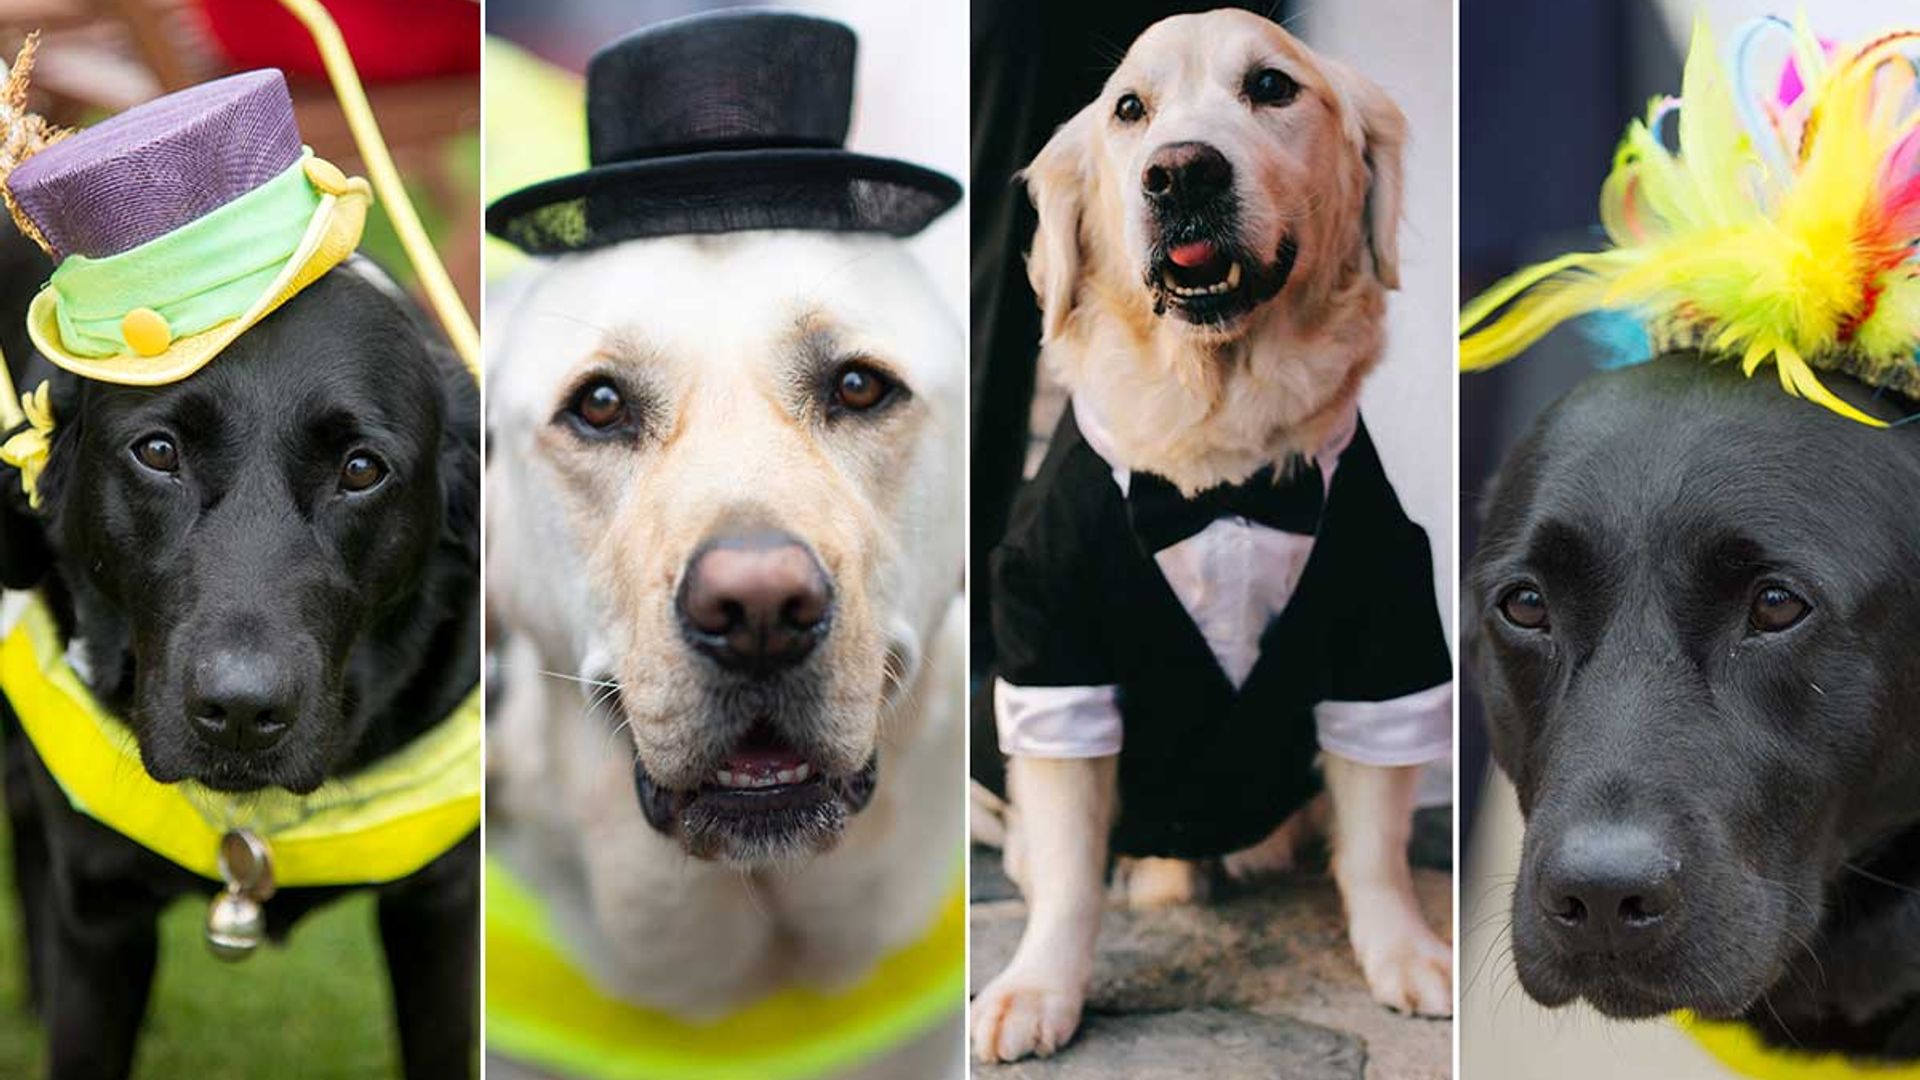 Royal Ascot's best dressed dogs! 7 photos of the smartest pups at the races